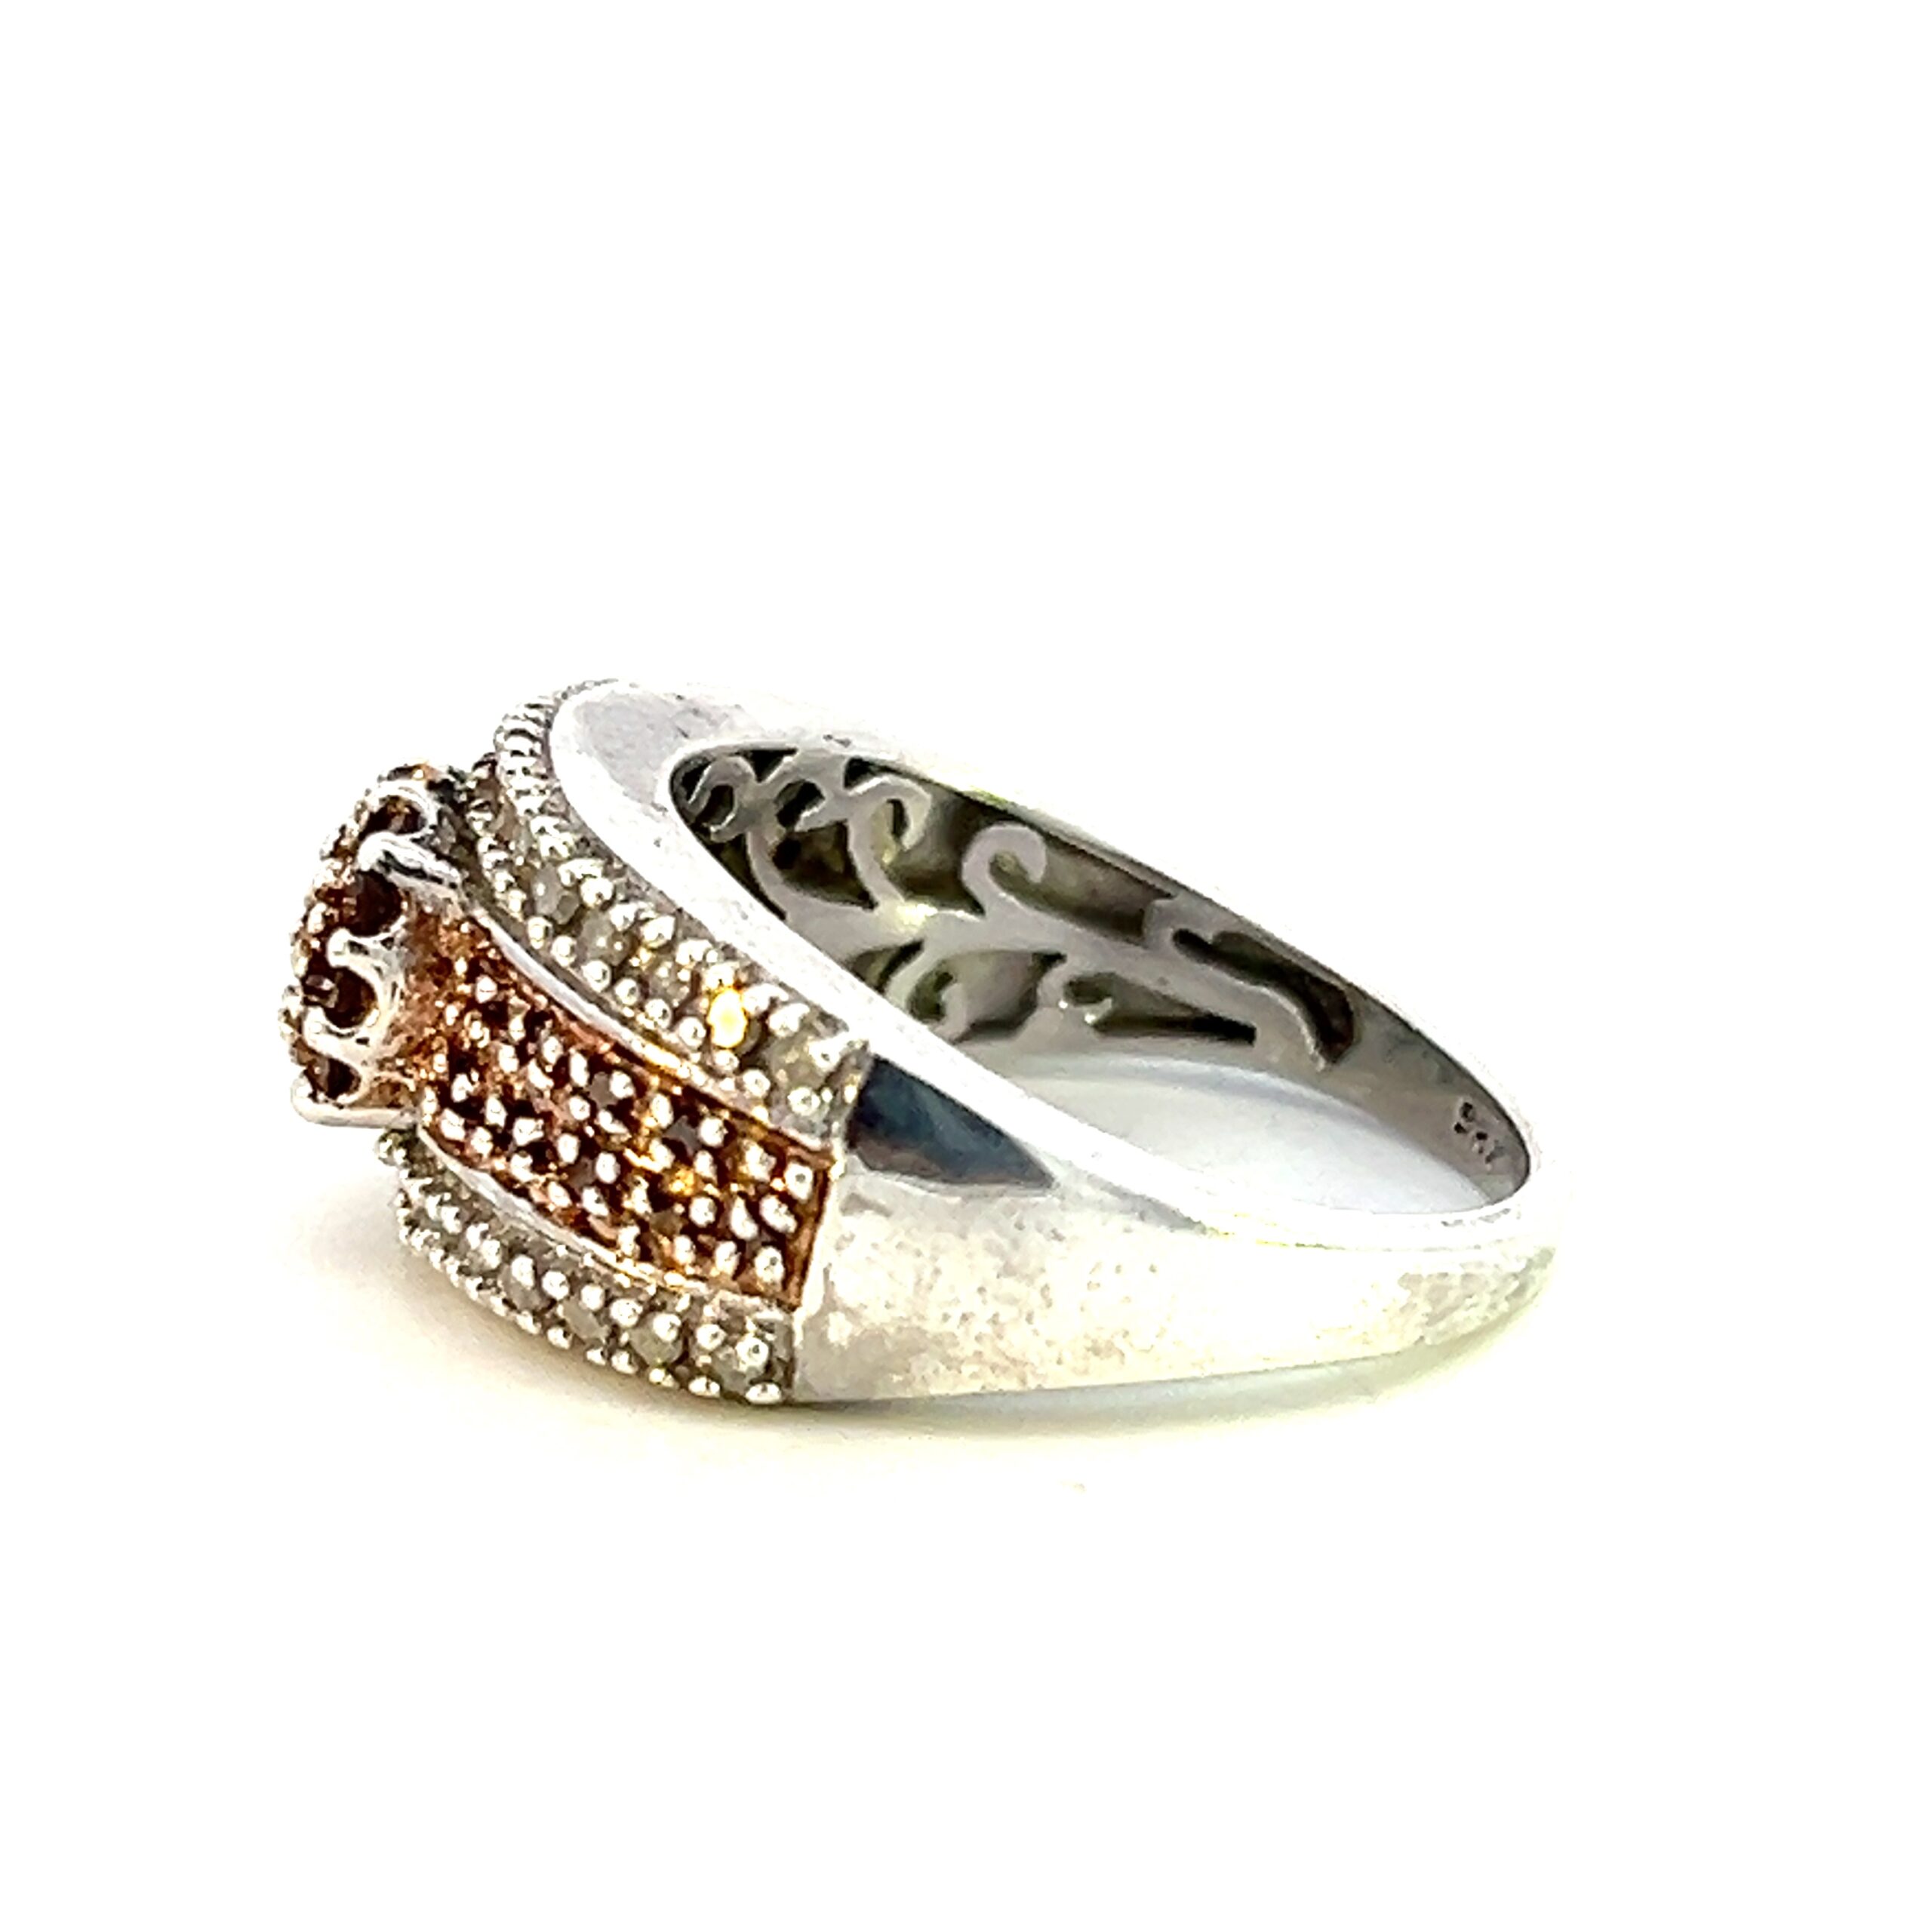 One estate bronze diamond ring crafted from sterling silver containing a center cluster of bronze diamonds in sterling silver pave settings. The band contains four rows with the outer two rows containing round white diamond in pave settings and the inner two rows plated in rose gold and containing bronze diamonds in pave settings.